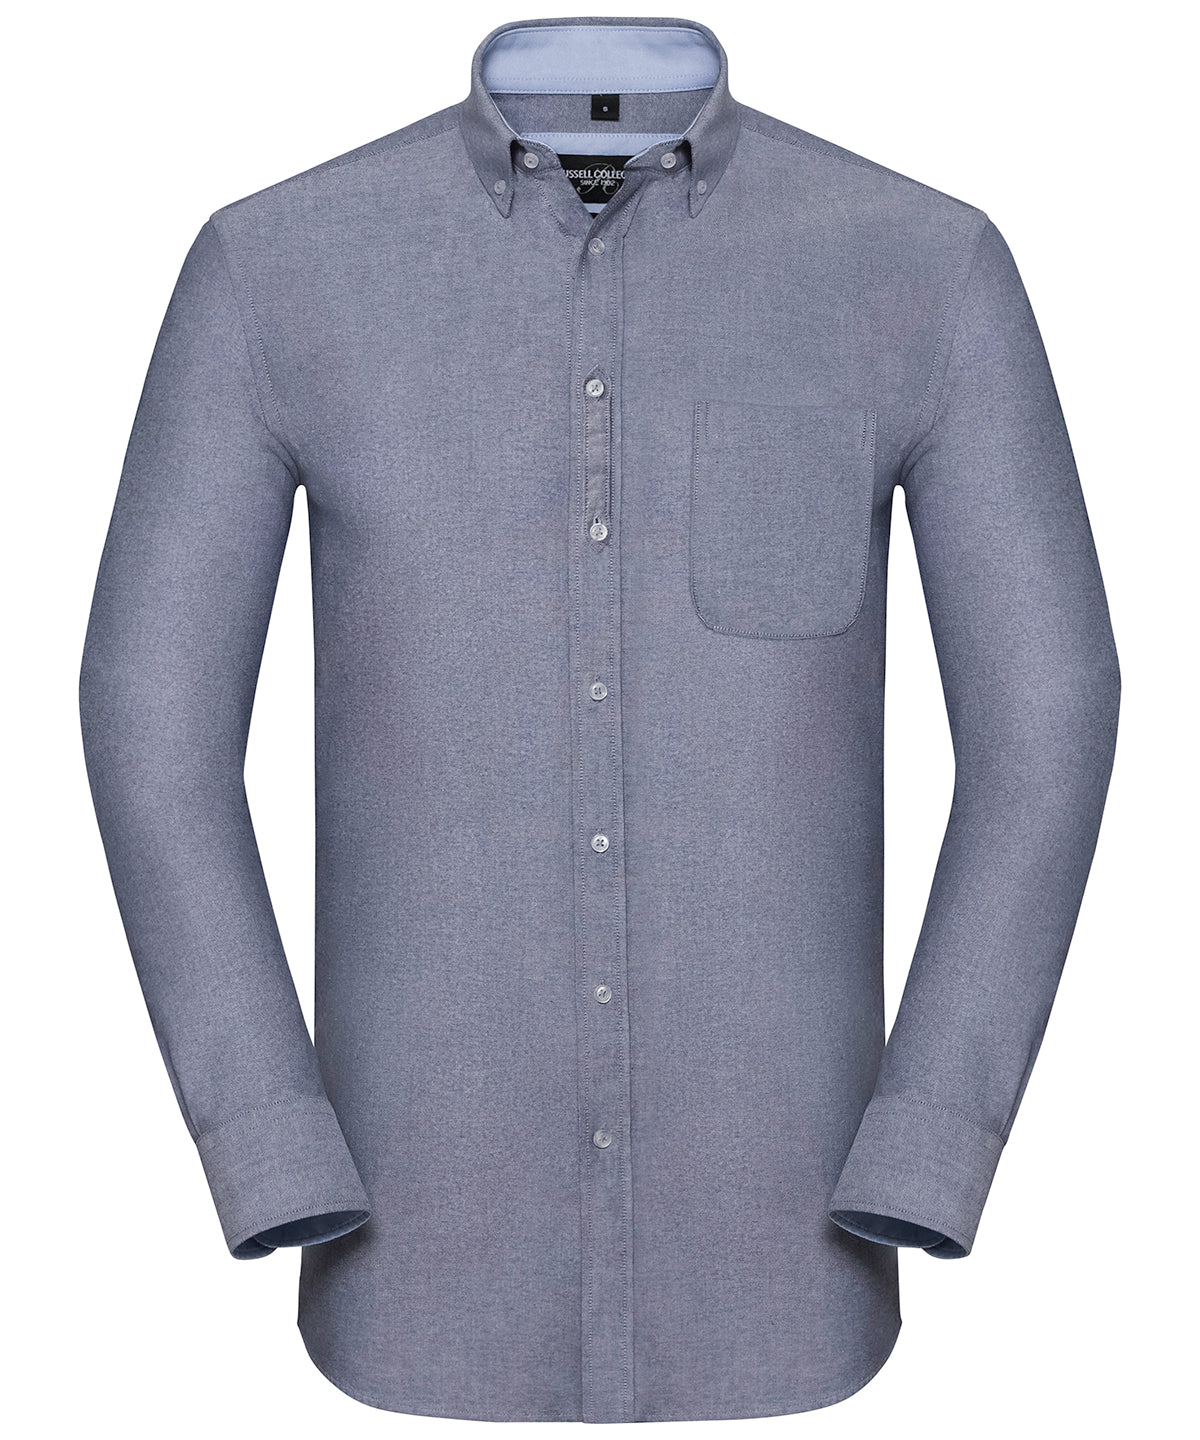 Long sleeve tailored washed Oxford shirt